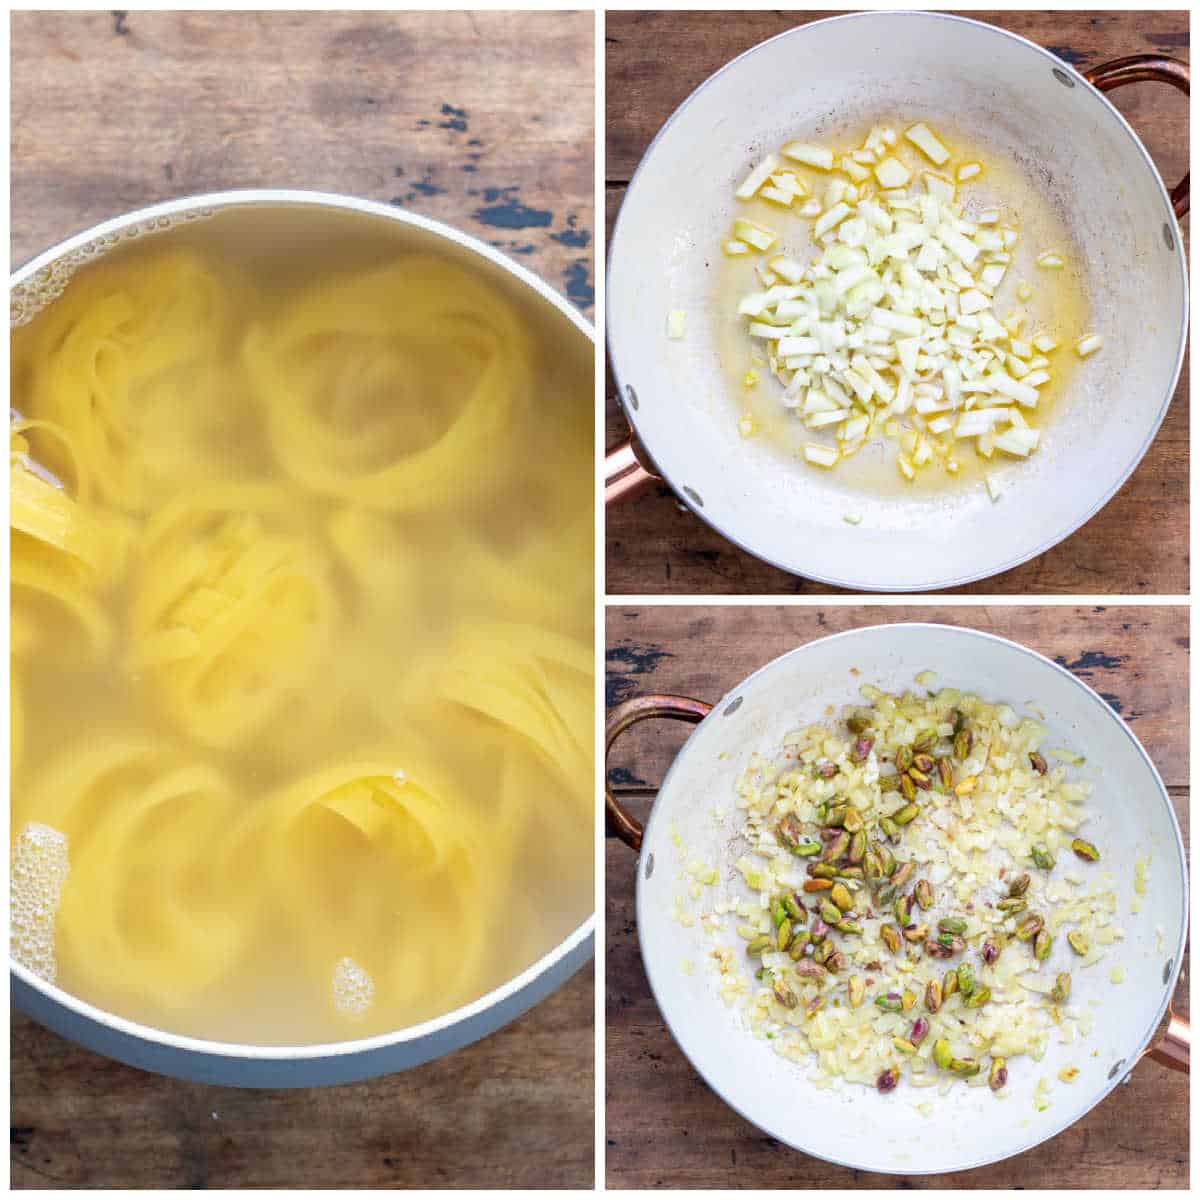 Collage: 1 cooking pasta, 2 pan of onions, 3 pistachios added.